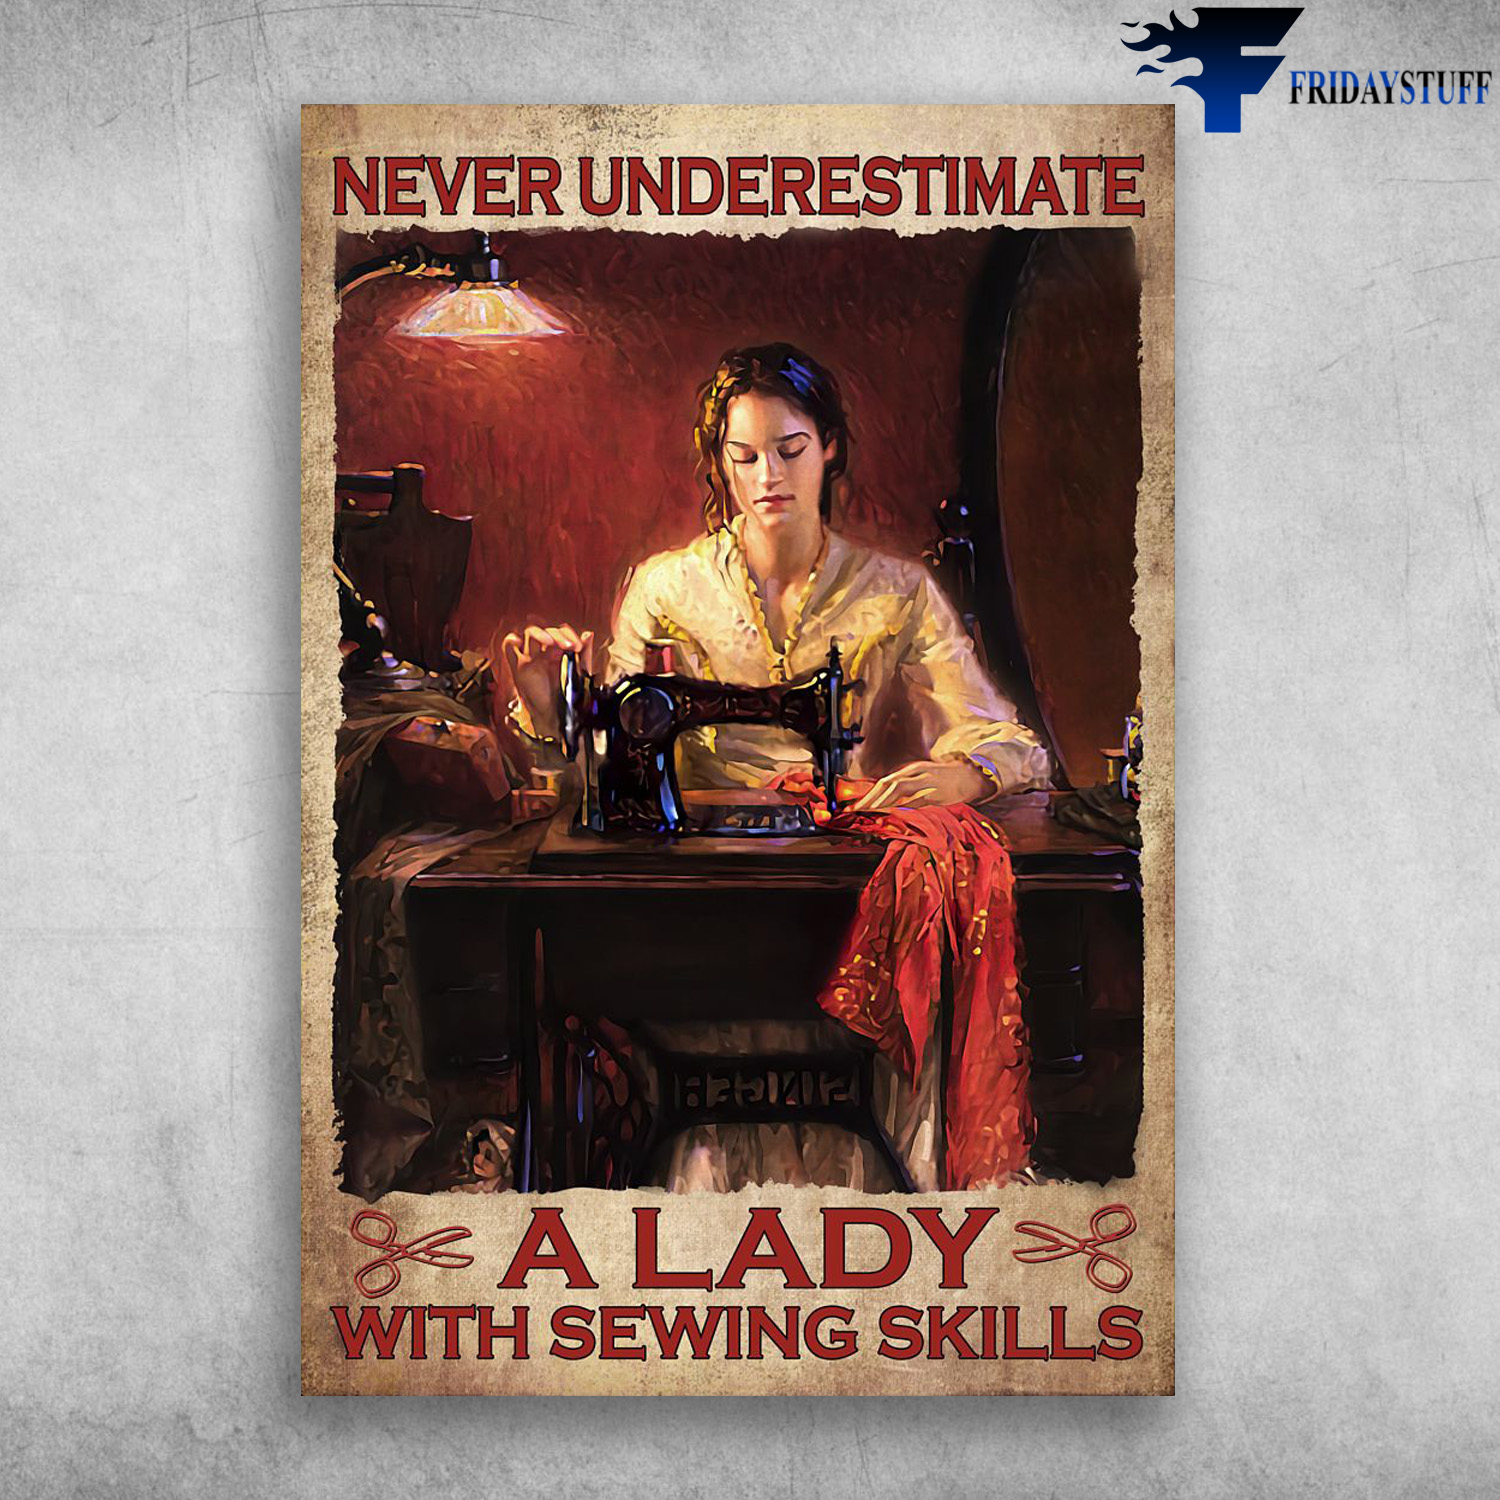 Lady Sewing - Never Underestimate, A Lady With Sewing Skills, Girl Sewing